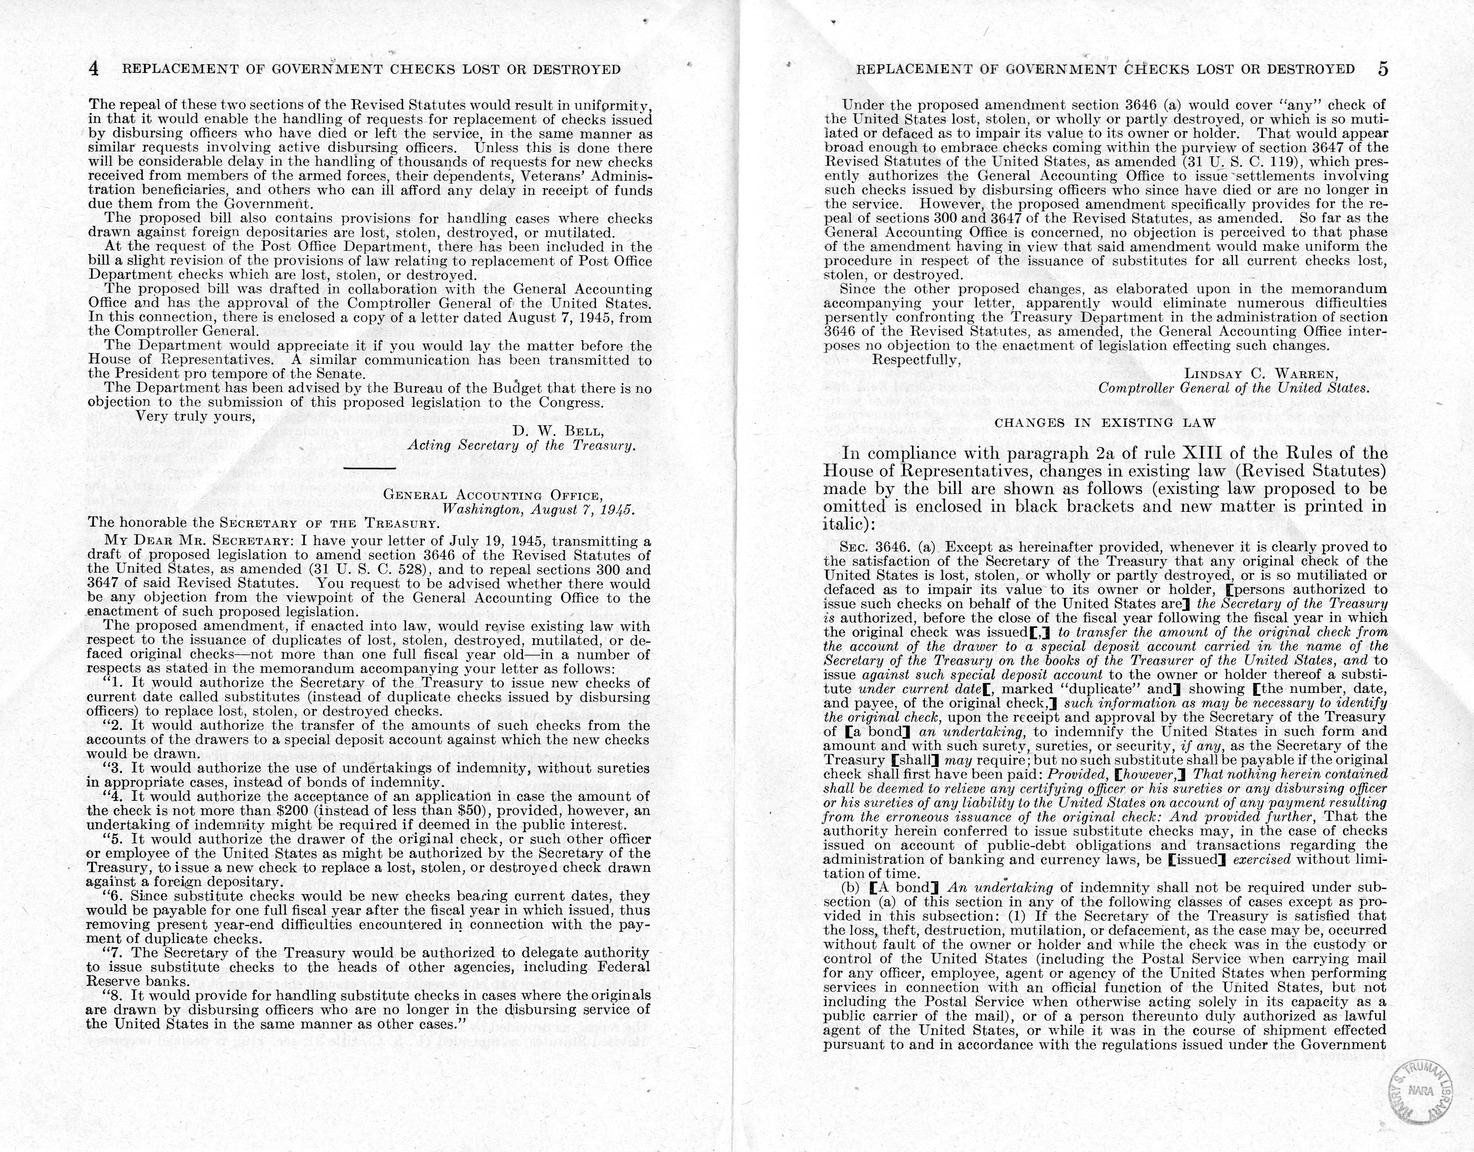 Memorandum from Harold D. Smith to M. C. Latta, H.R. 4350, To Amend Section 3646 of the Revised Statutes, Relating to the Issuance of Checks in Replacement of Lost, Stolen, Destroyed, Mutilated, or Defaced Checks of the United States, with Attachments